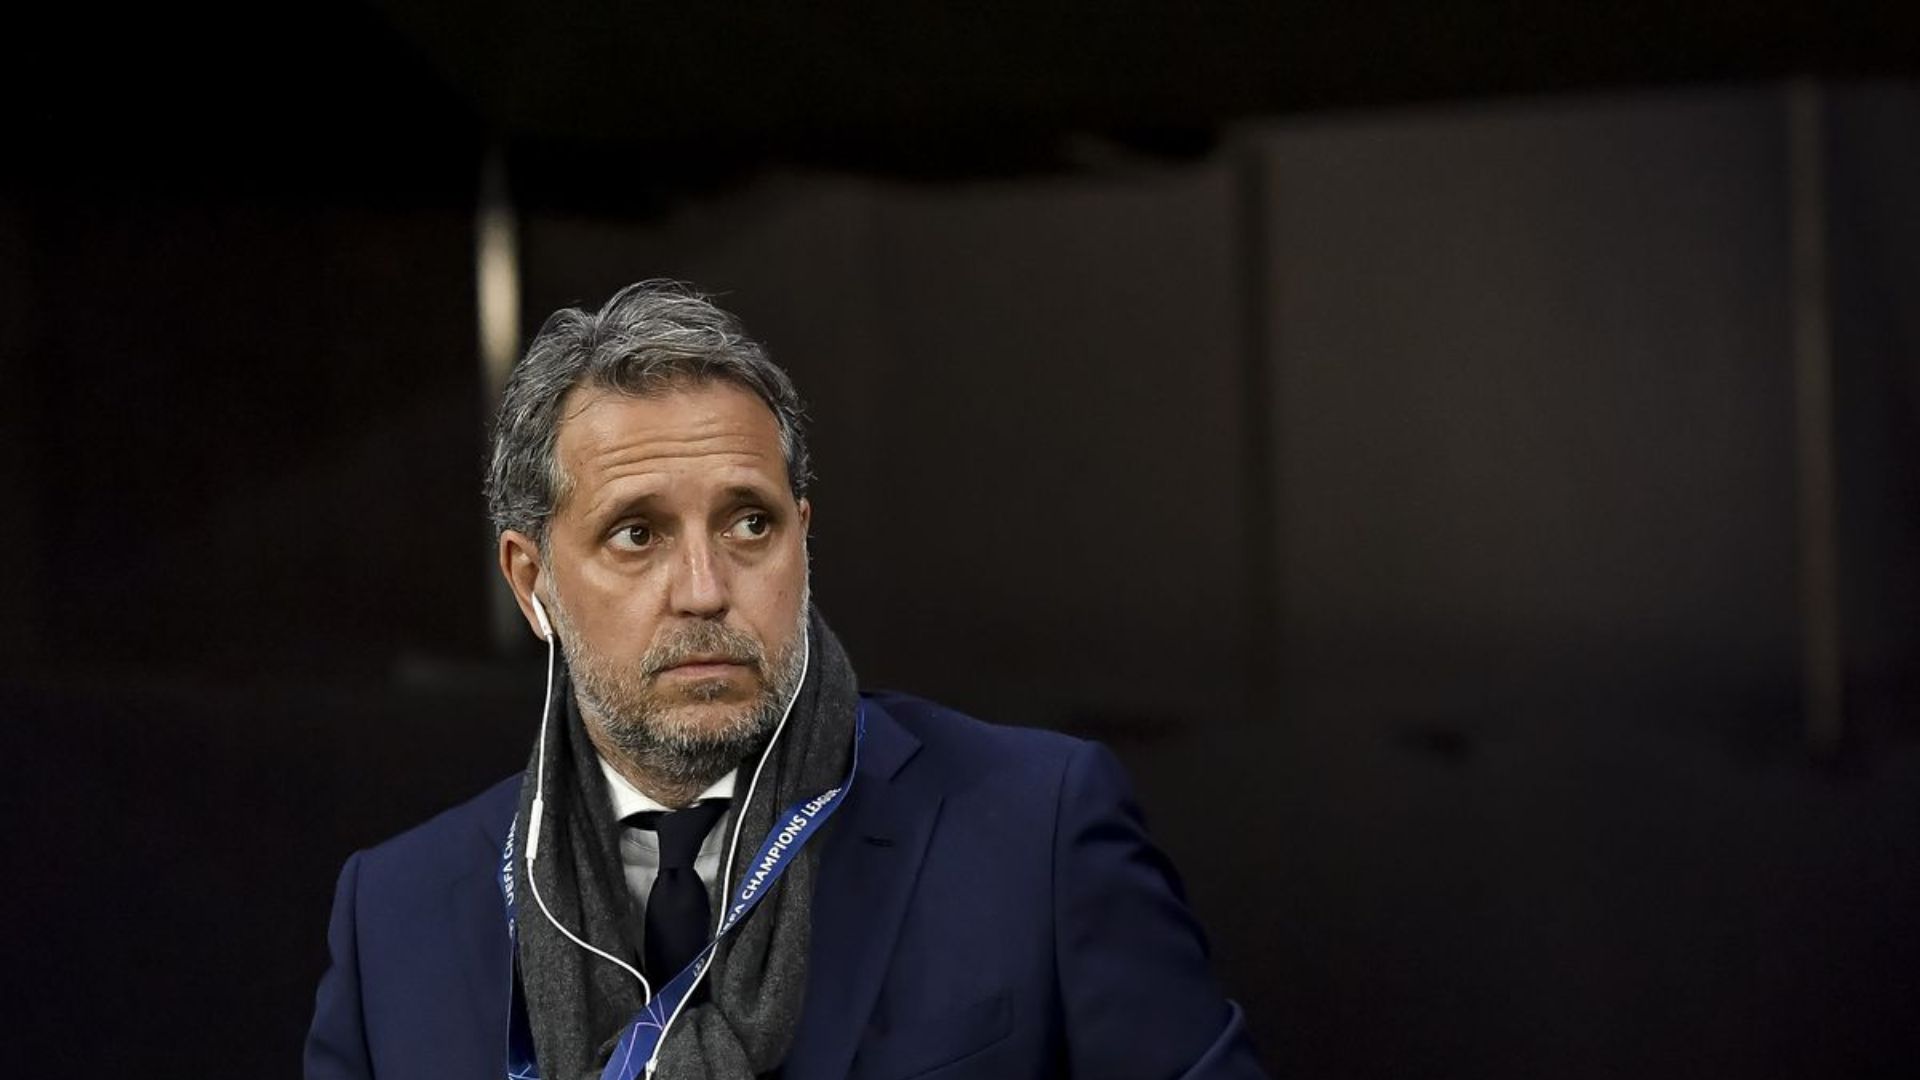 Report: One factor that is likely to complicate Tottenham's search to replace Paratici